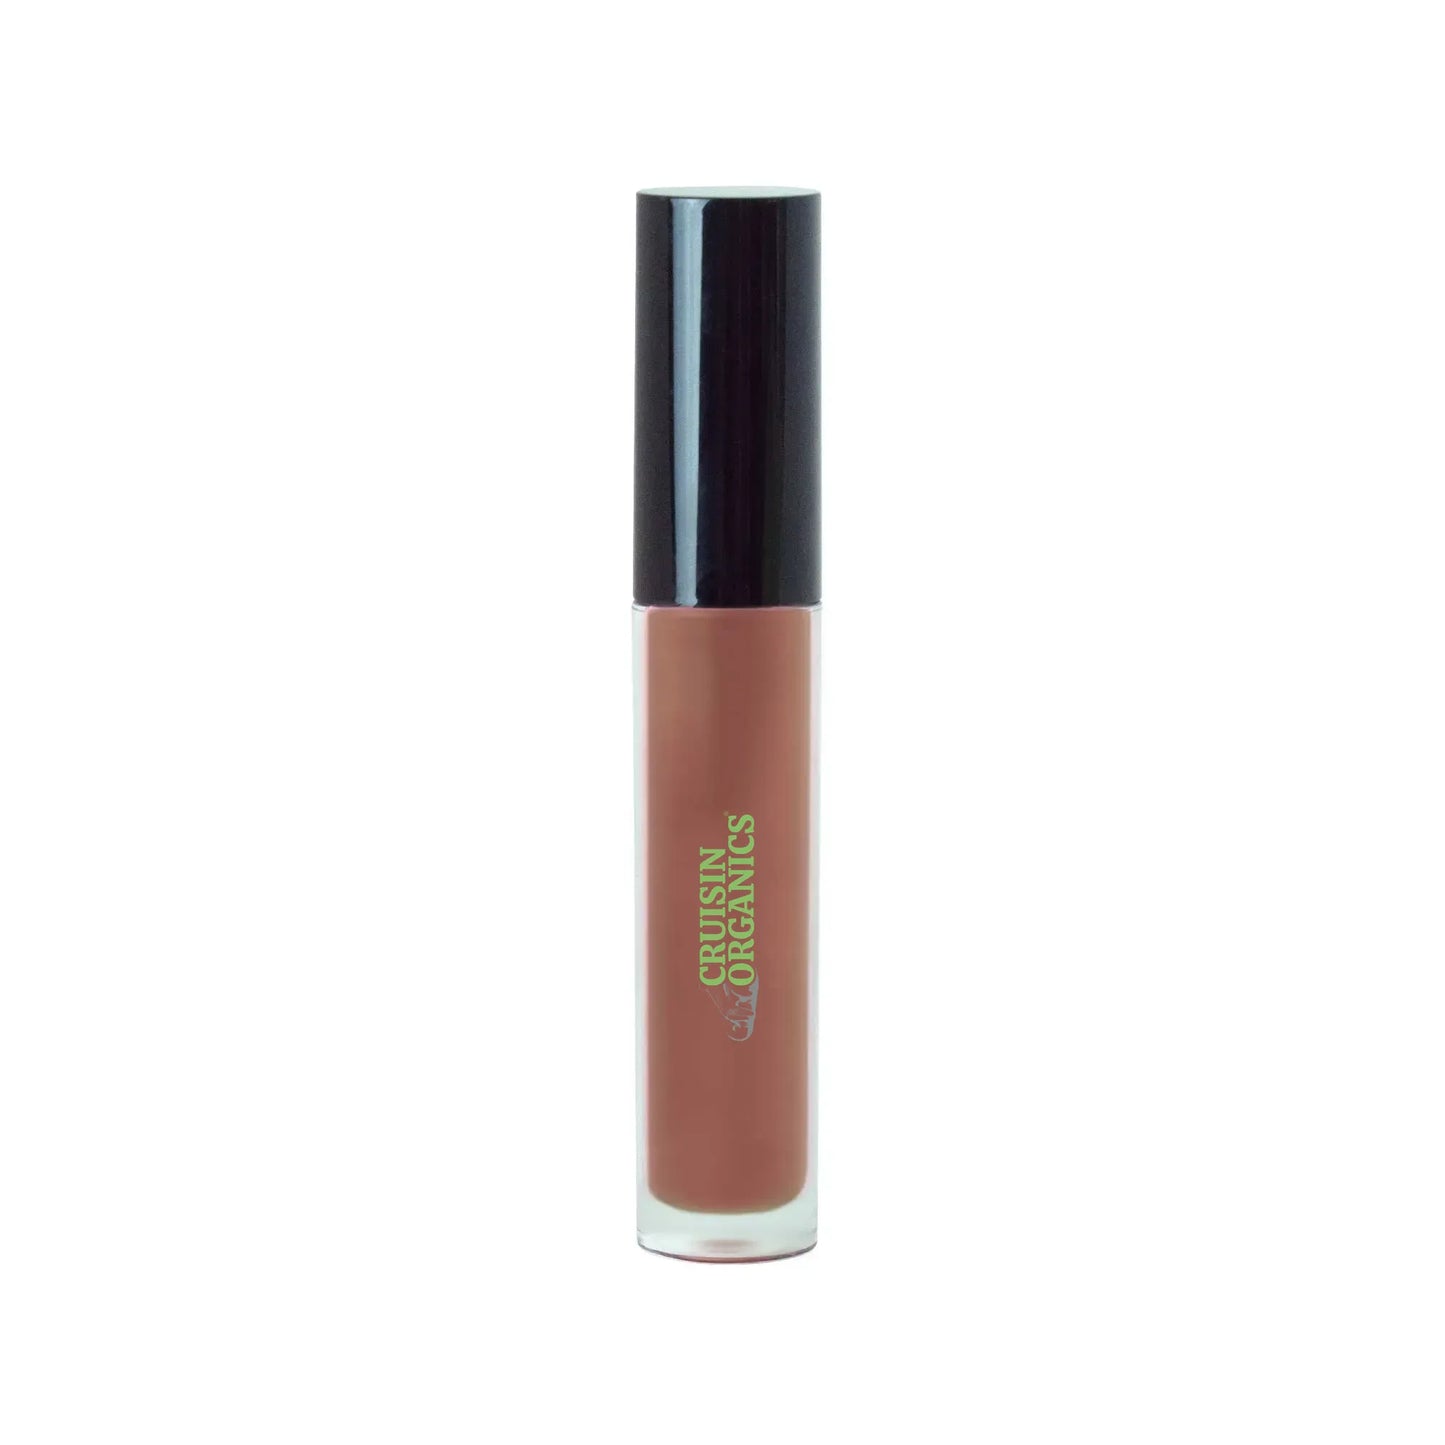 Experience the indulgent sensation of Cruisin Organic's Hot Chocolate Lip Gloss. Infused with the revitalizing scent of cocoa, this milky lip gloss will leave your lips feeling nourished and refreshed. Treat yourself to the ultimate chocolatey treat for your lips.